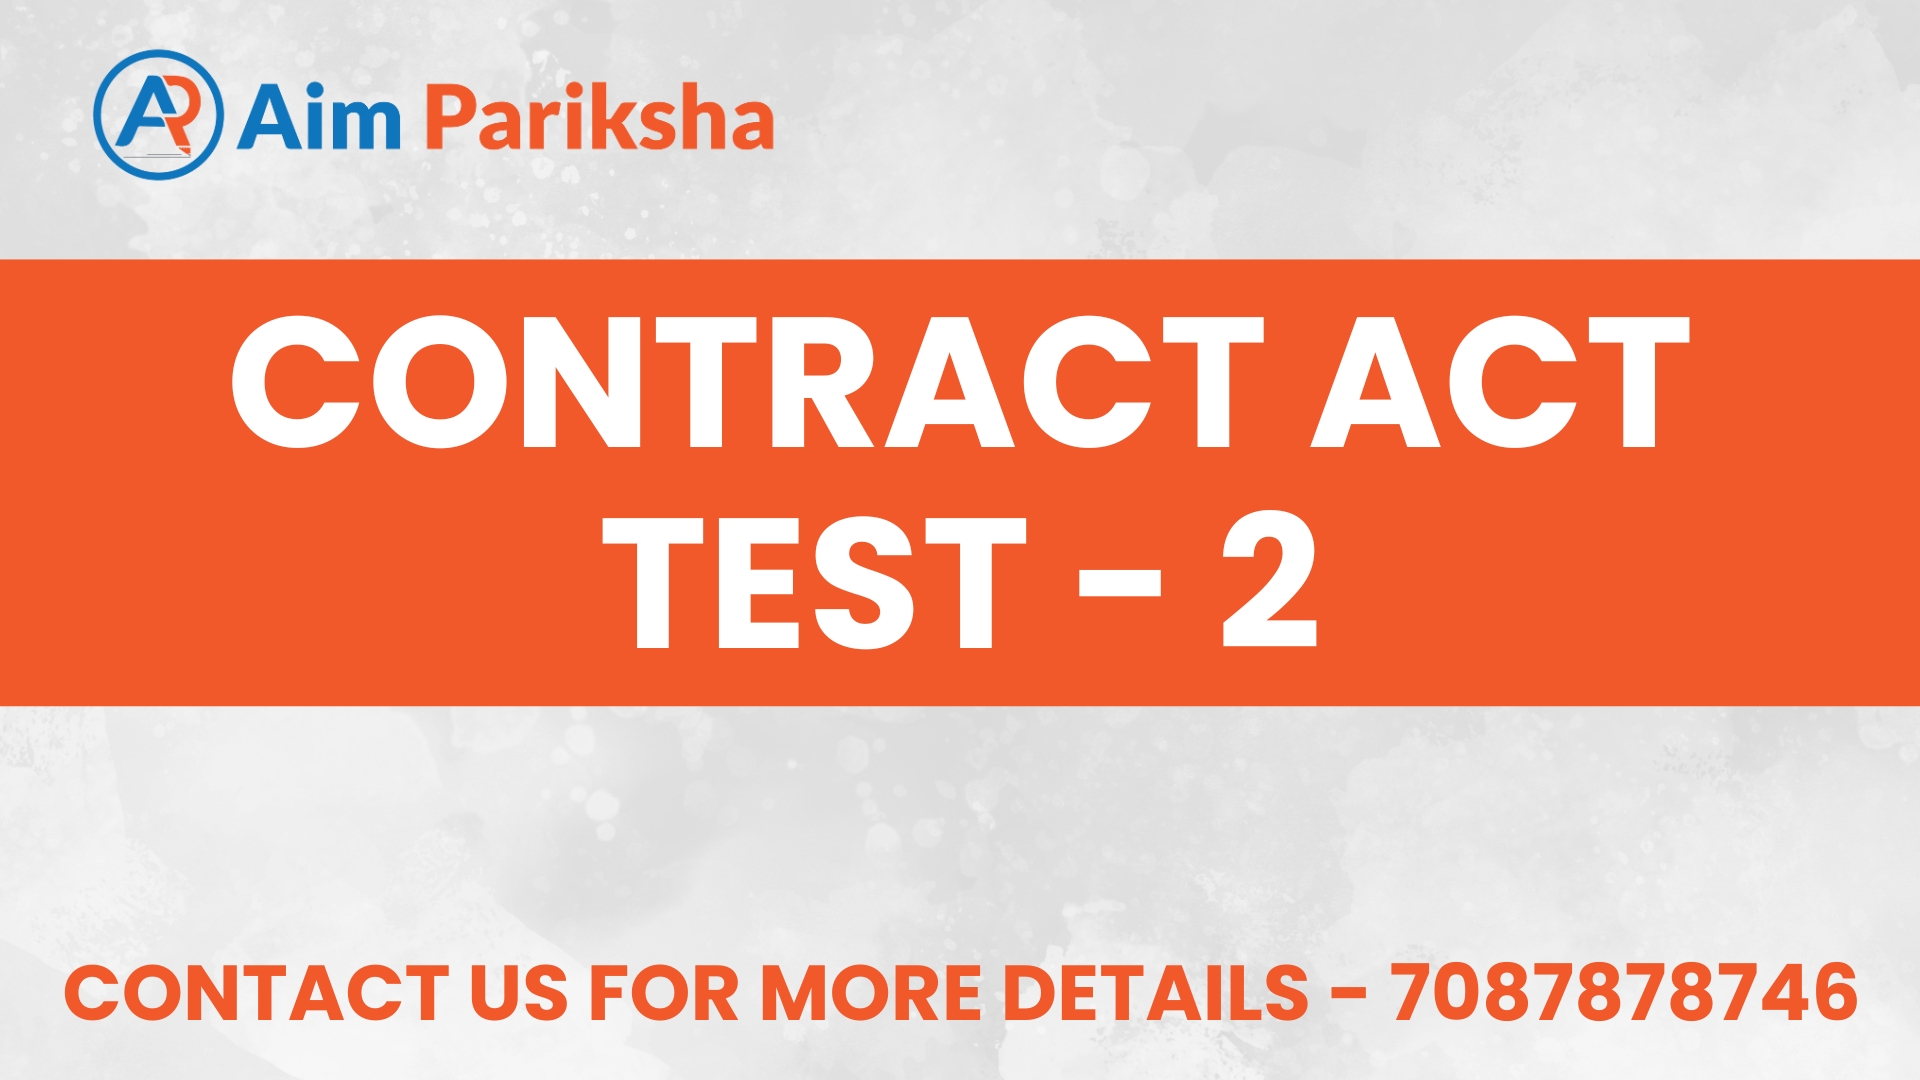 Contract Act Test - 2